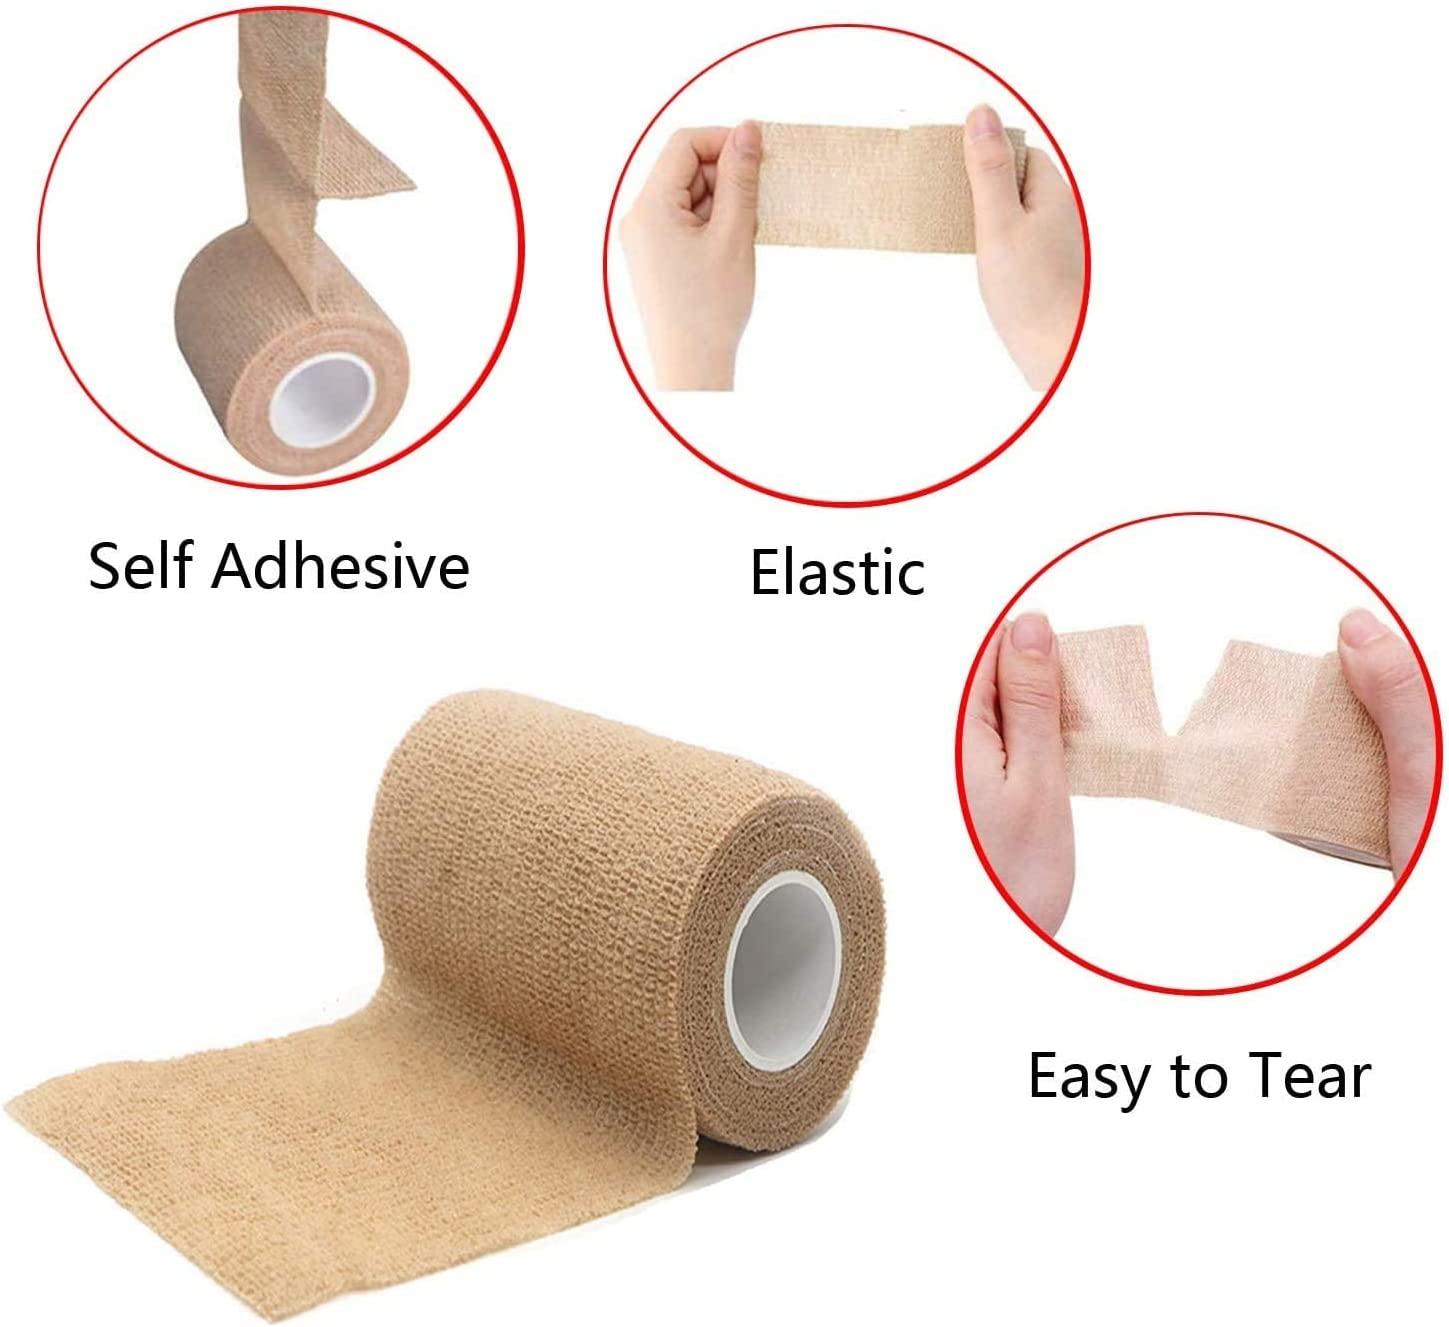 15 Pack 2 Inch x 5 Yards Self Adhesive Bandage Breathable Cohesive Bandage  Wrap Rolls Elastic Self-Adherent Tape for Stretch Athletic, Sports, Wrist